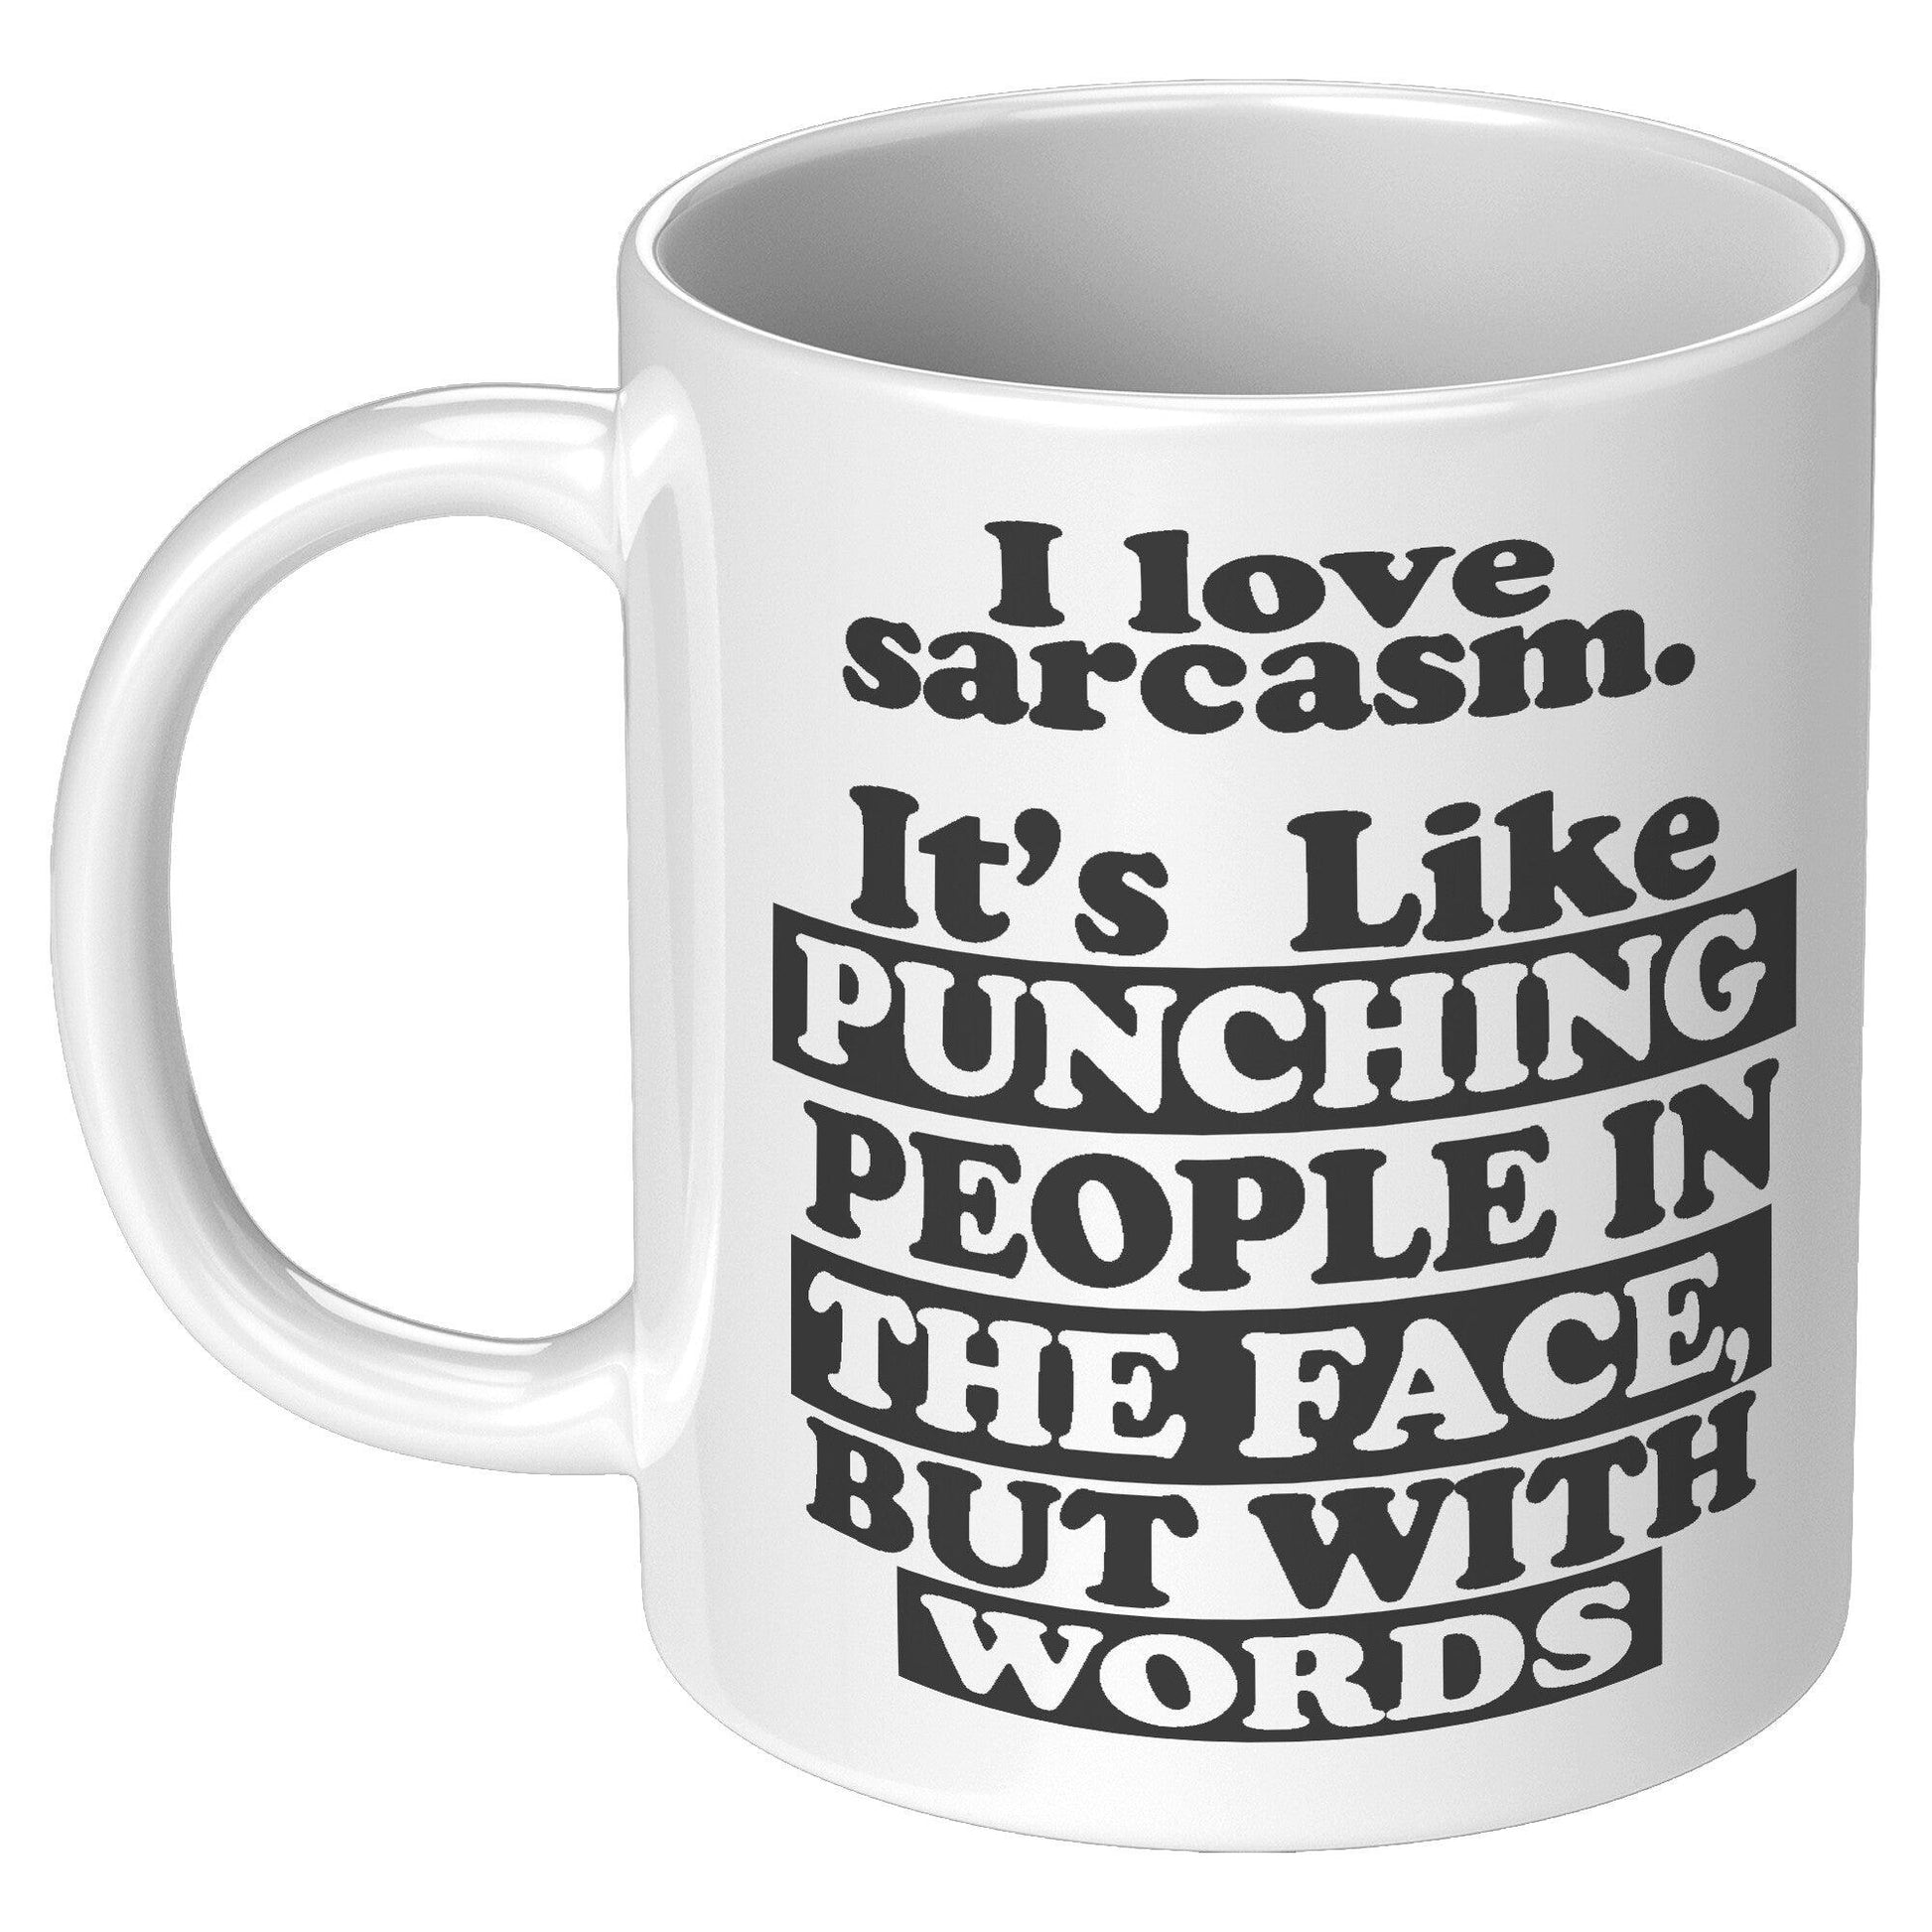 I Love Sarcasm. It's Like Punching People In The Face, But With Words White Mug - TheGivenGet